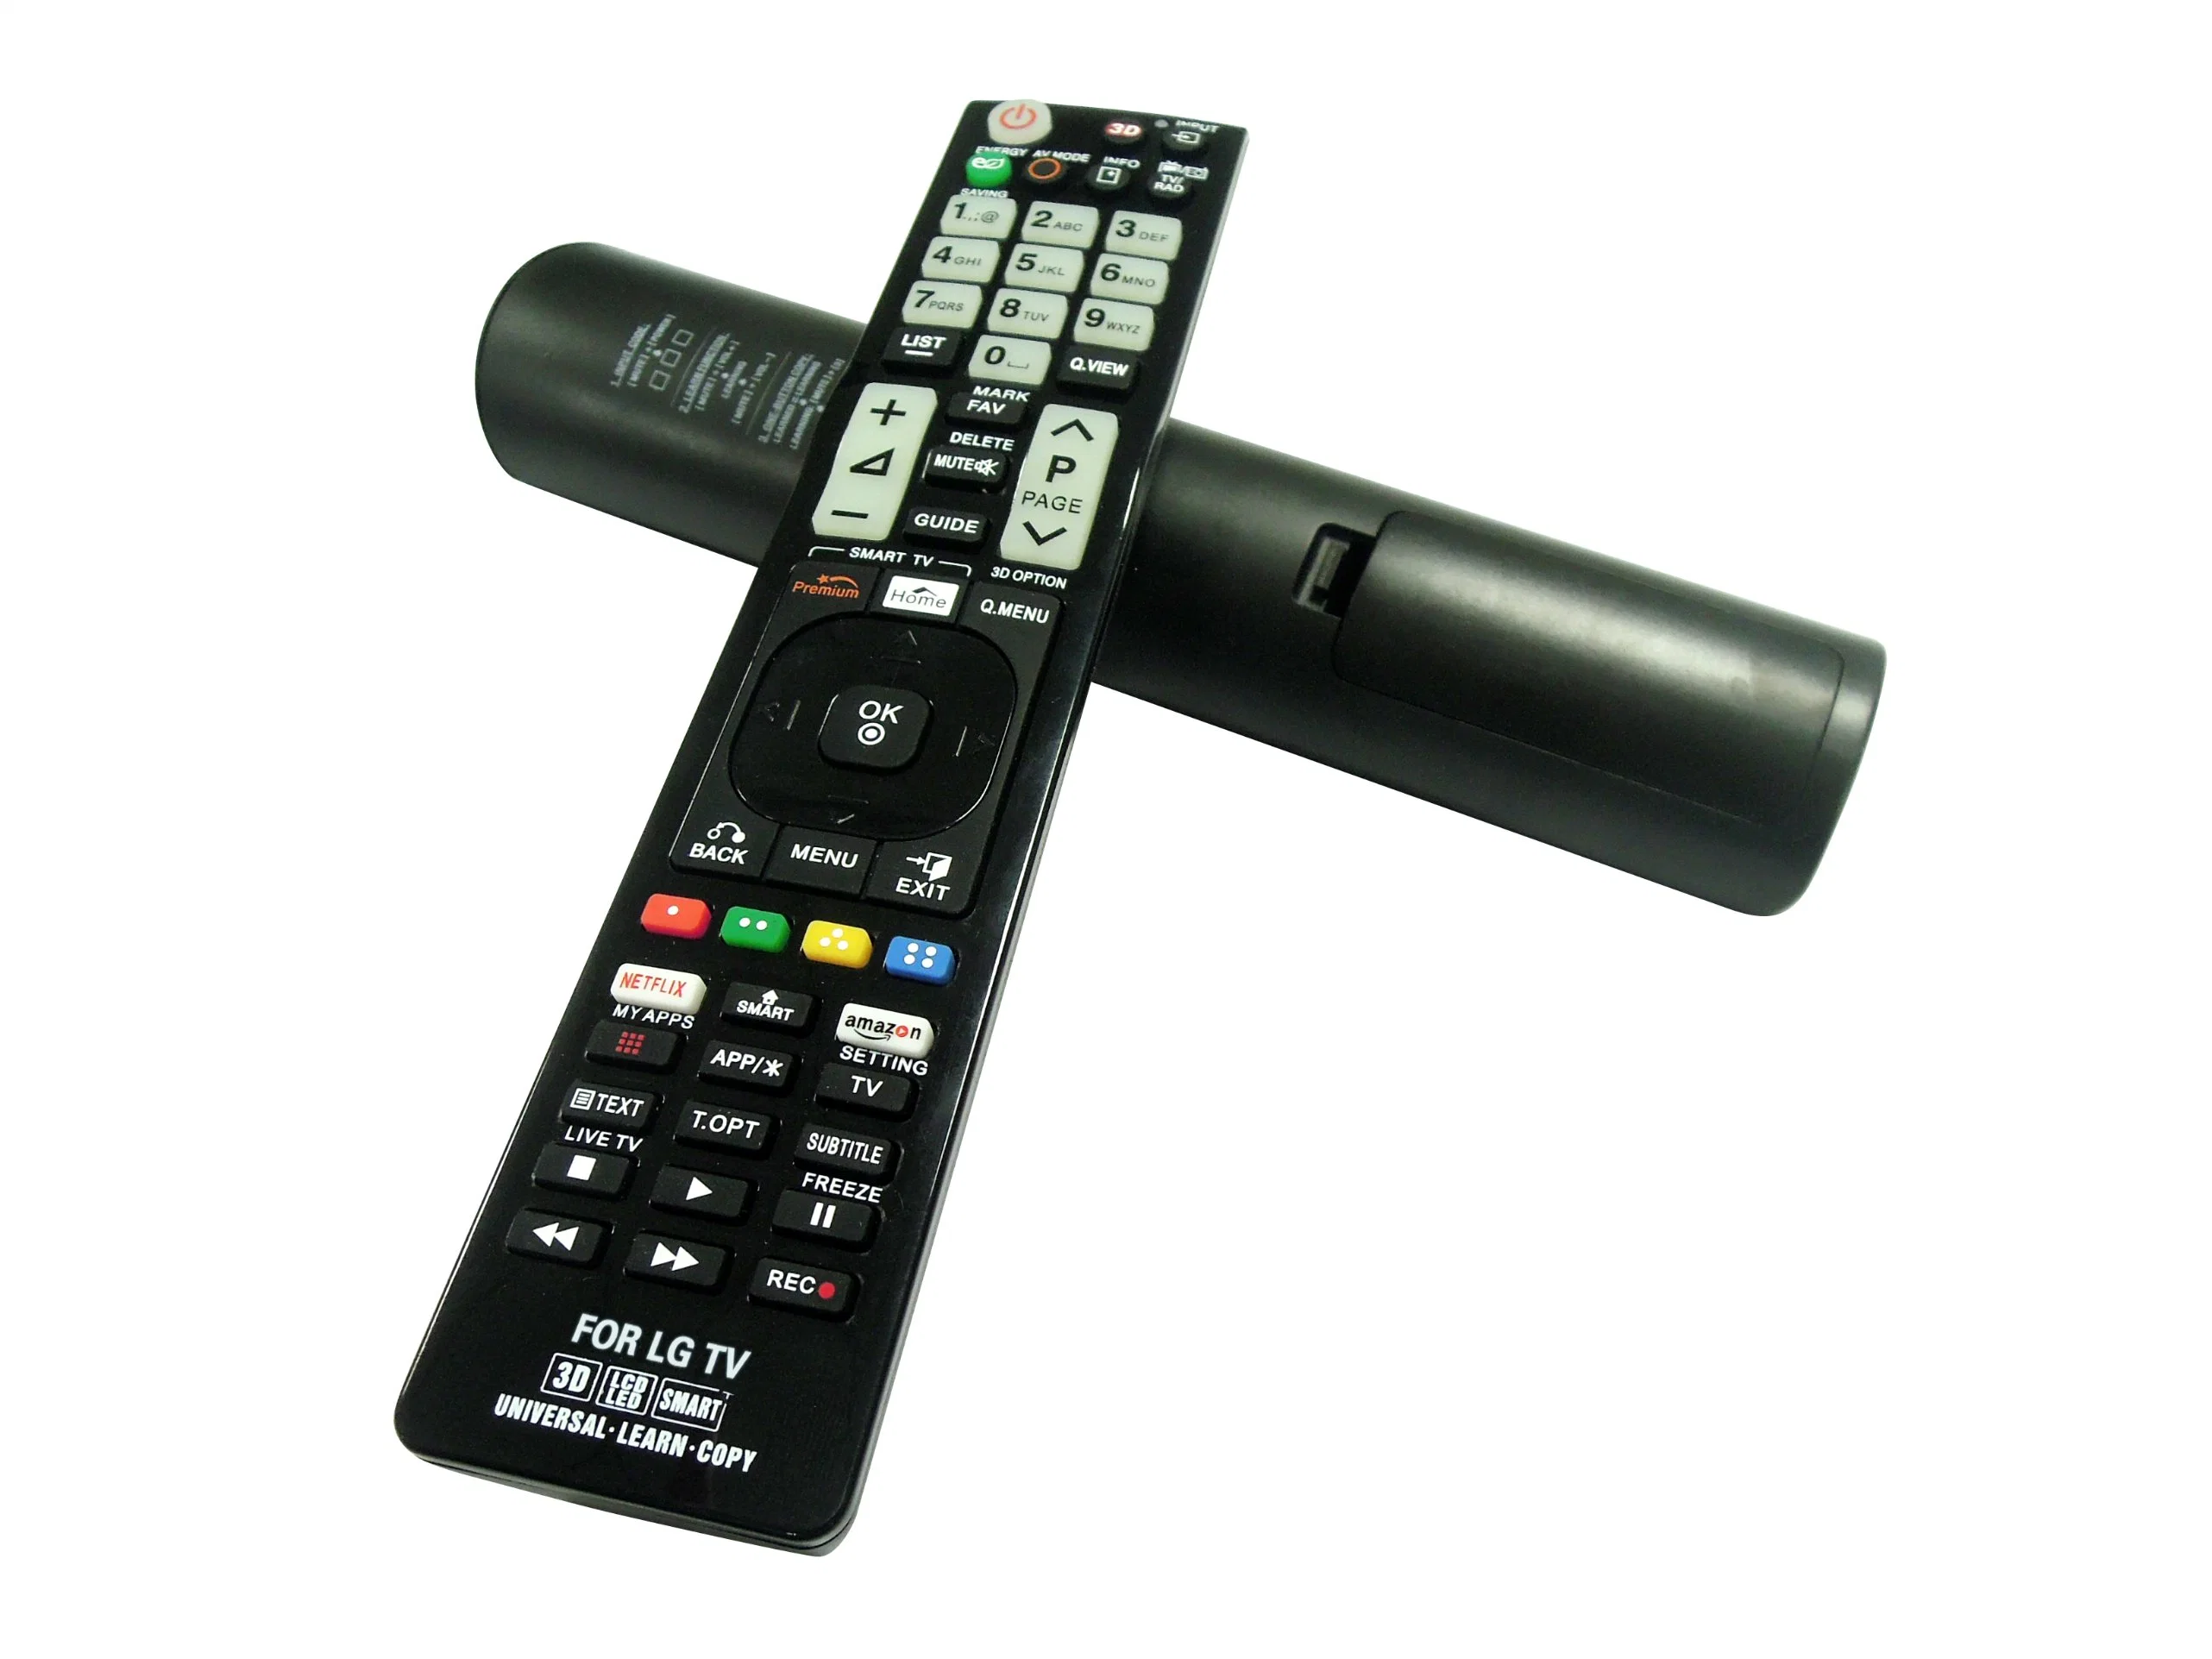 New Branded Universal Learning + Copy TV Remote Control for Panasonic Samsung LG Sony Toshiba Phillips